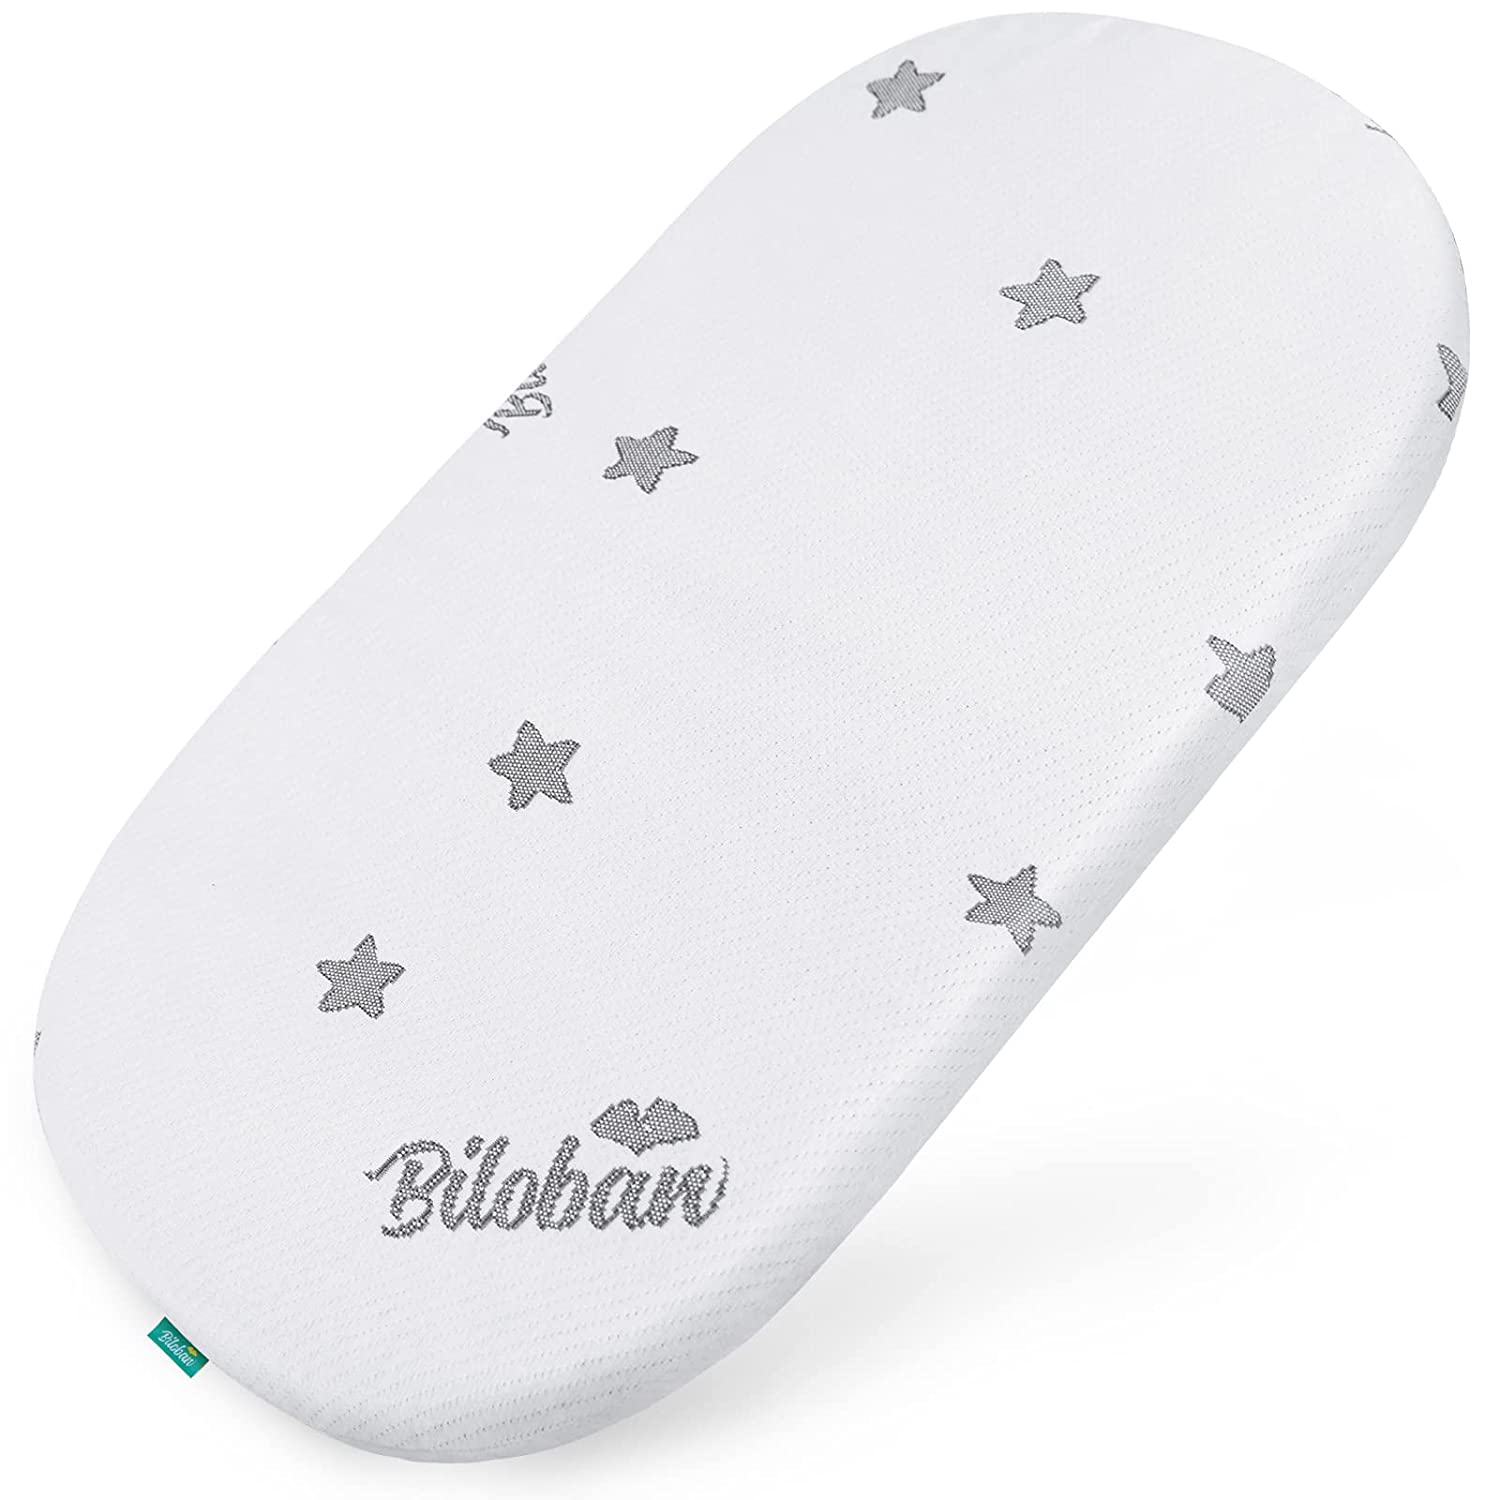 Shop by Size - Bassinet Mattress with Bamboo Cover, Waterproof & Breathable, Oval - Biloban Online Store